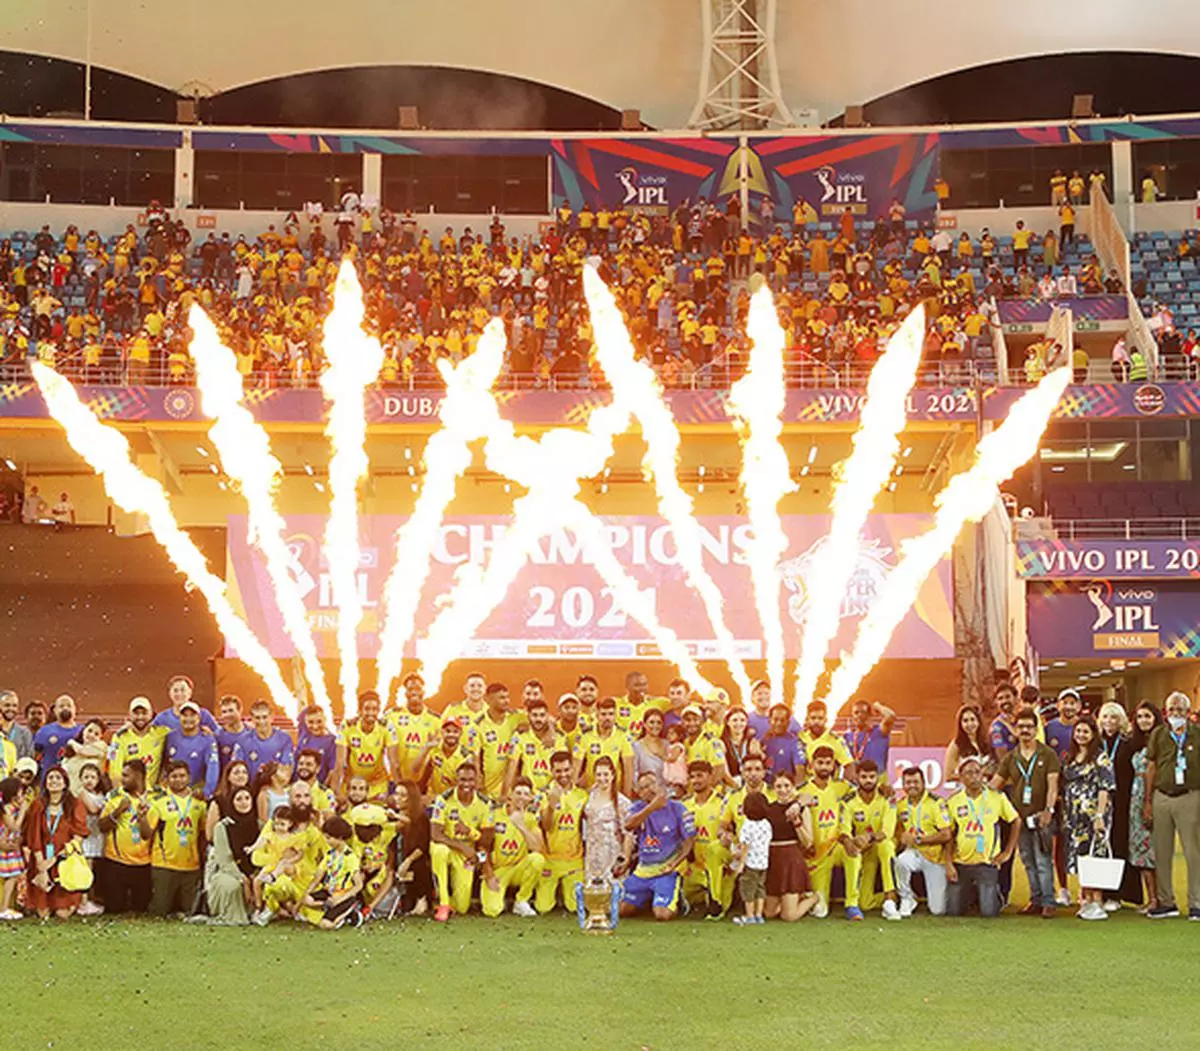 Chennai Super Kings were crowned champions during the final of the last season’s Indian Premier League, on October 15, 2021